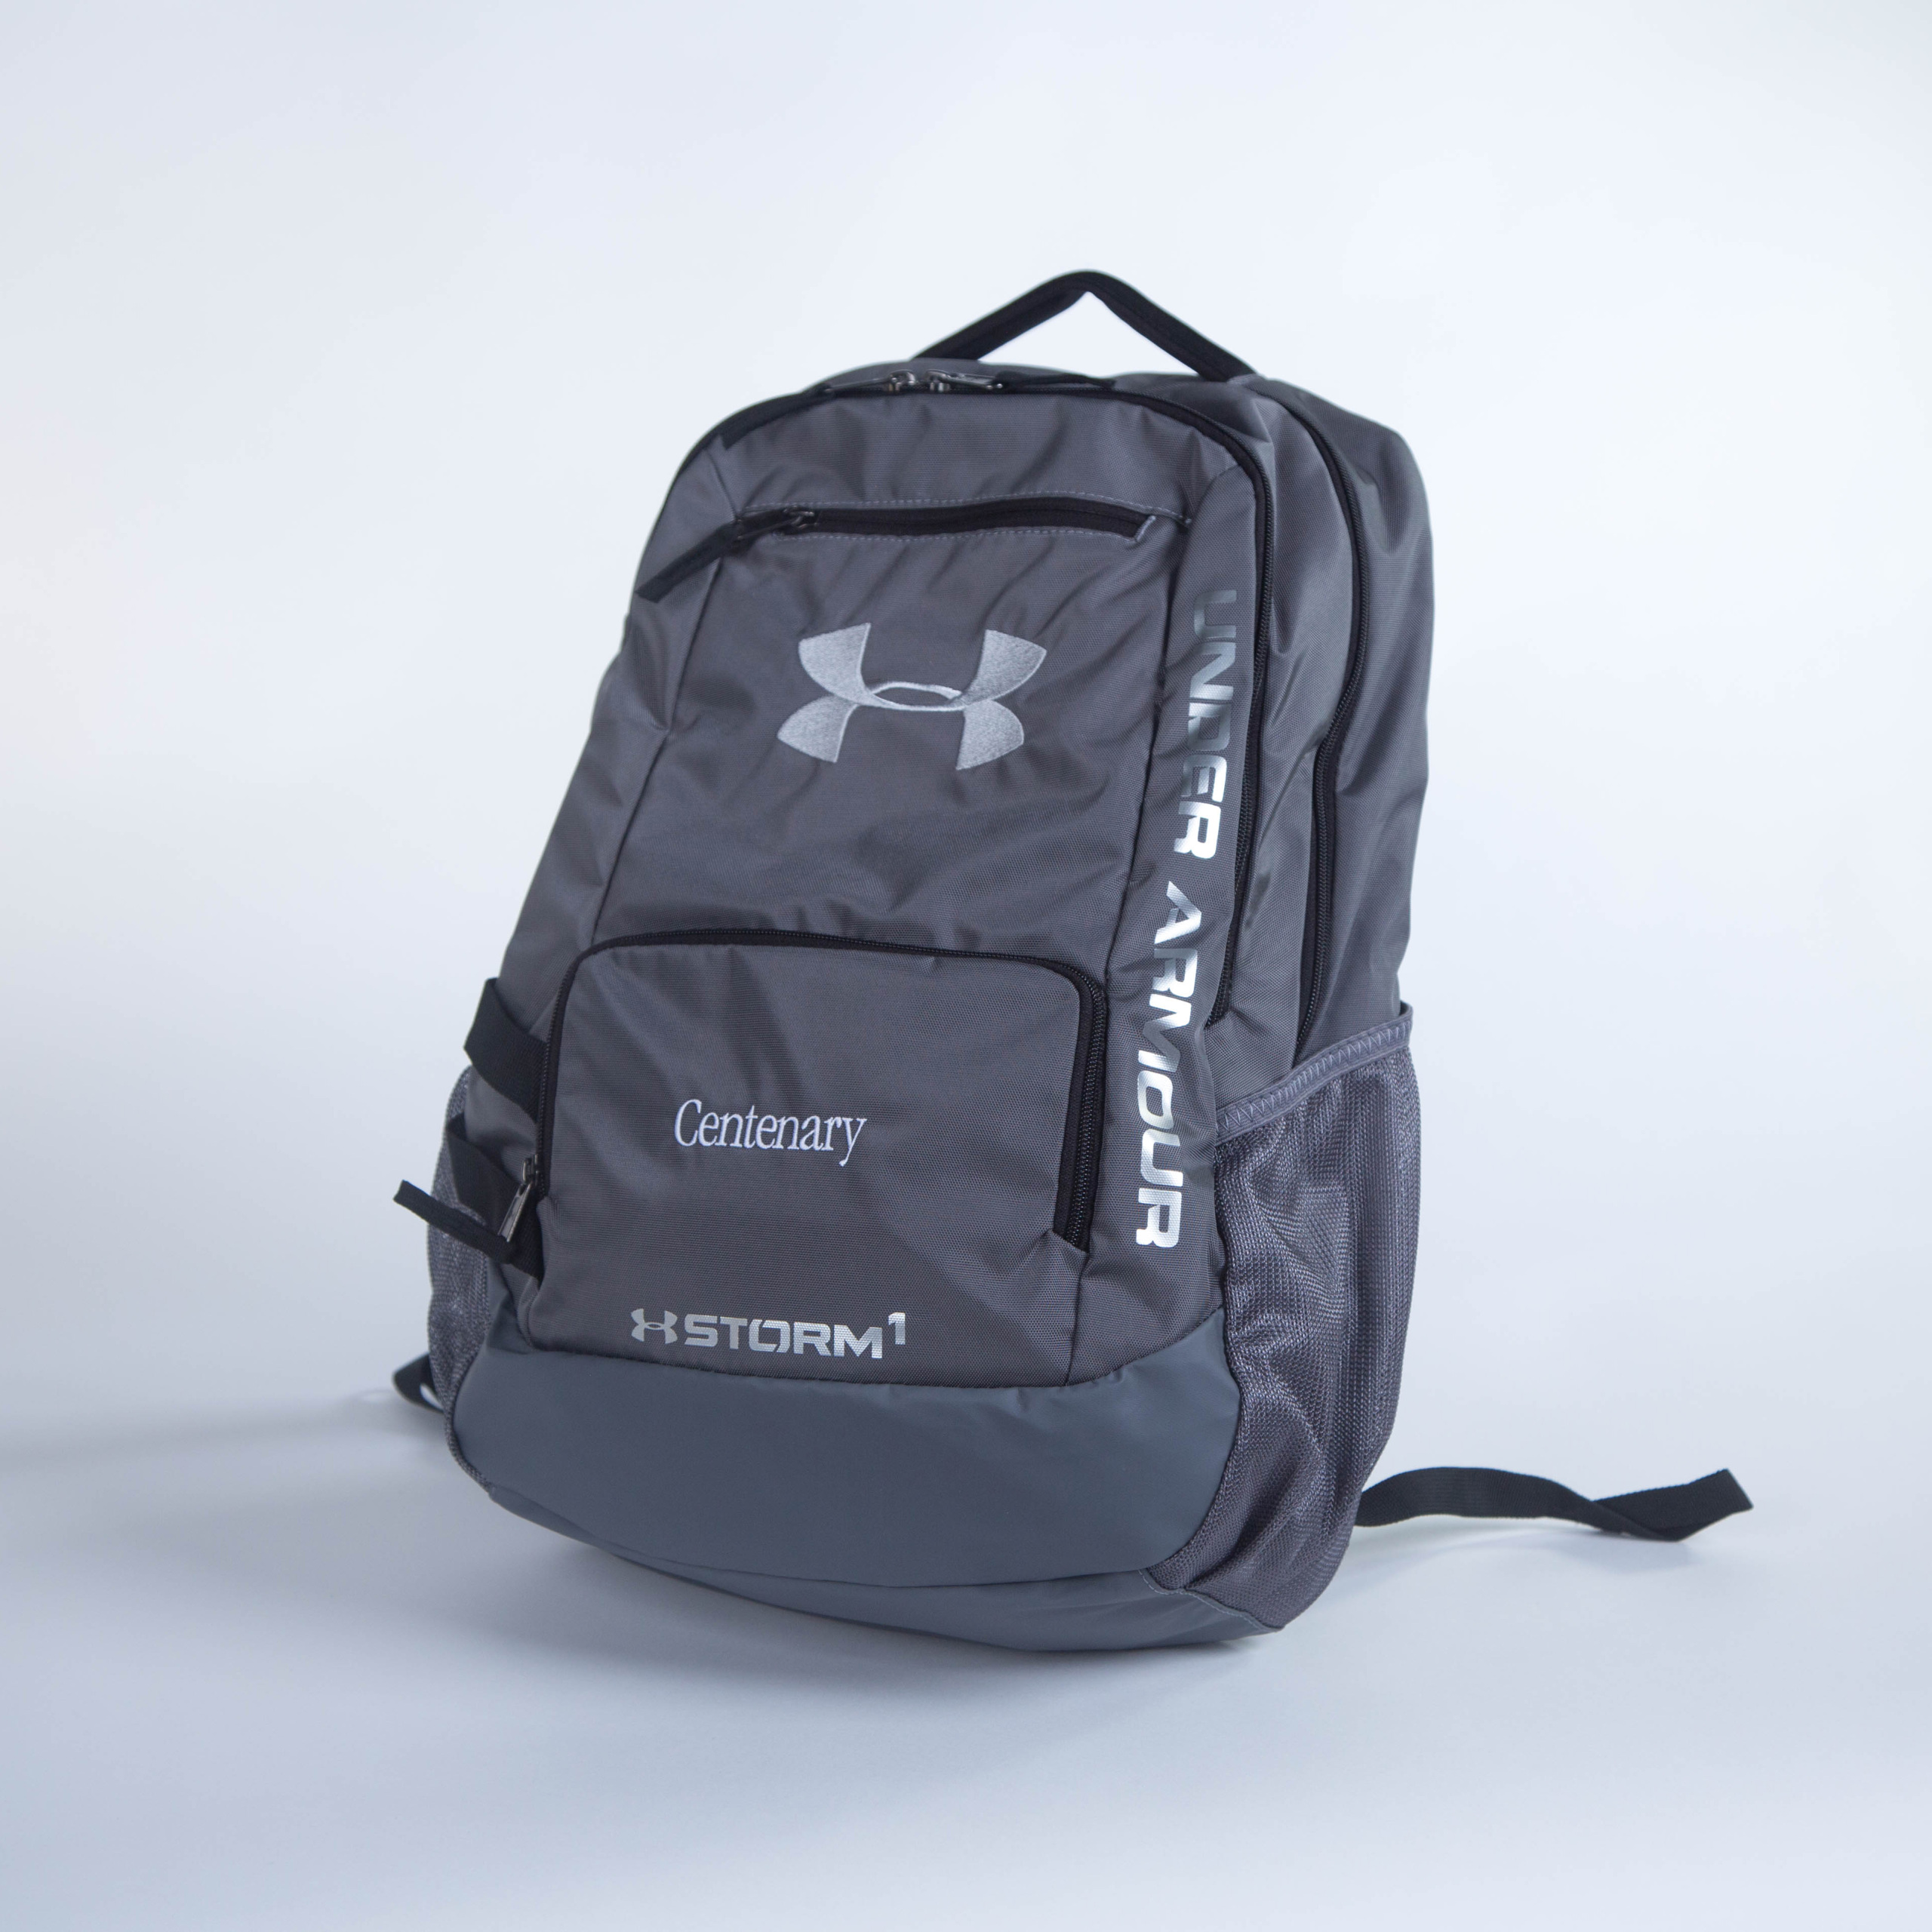 under armour storm 1 backpack